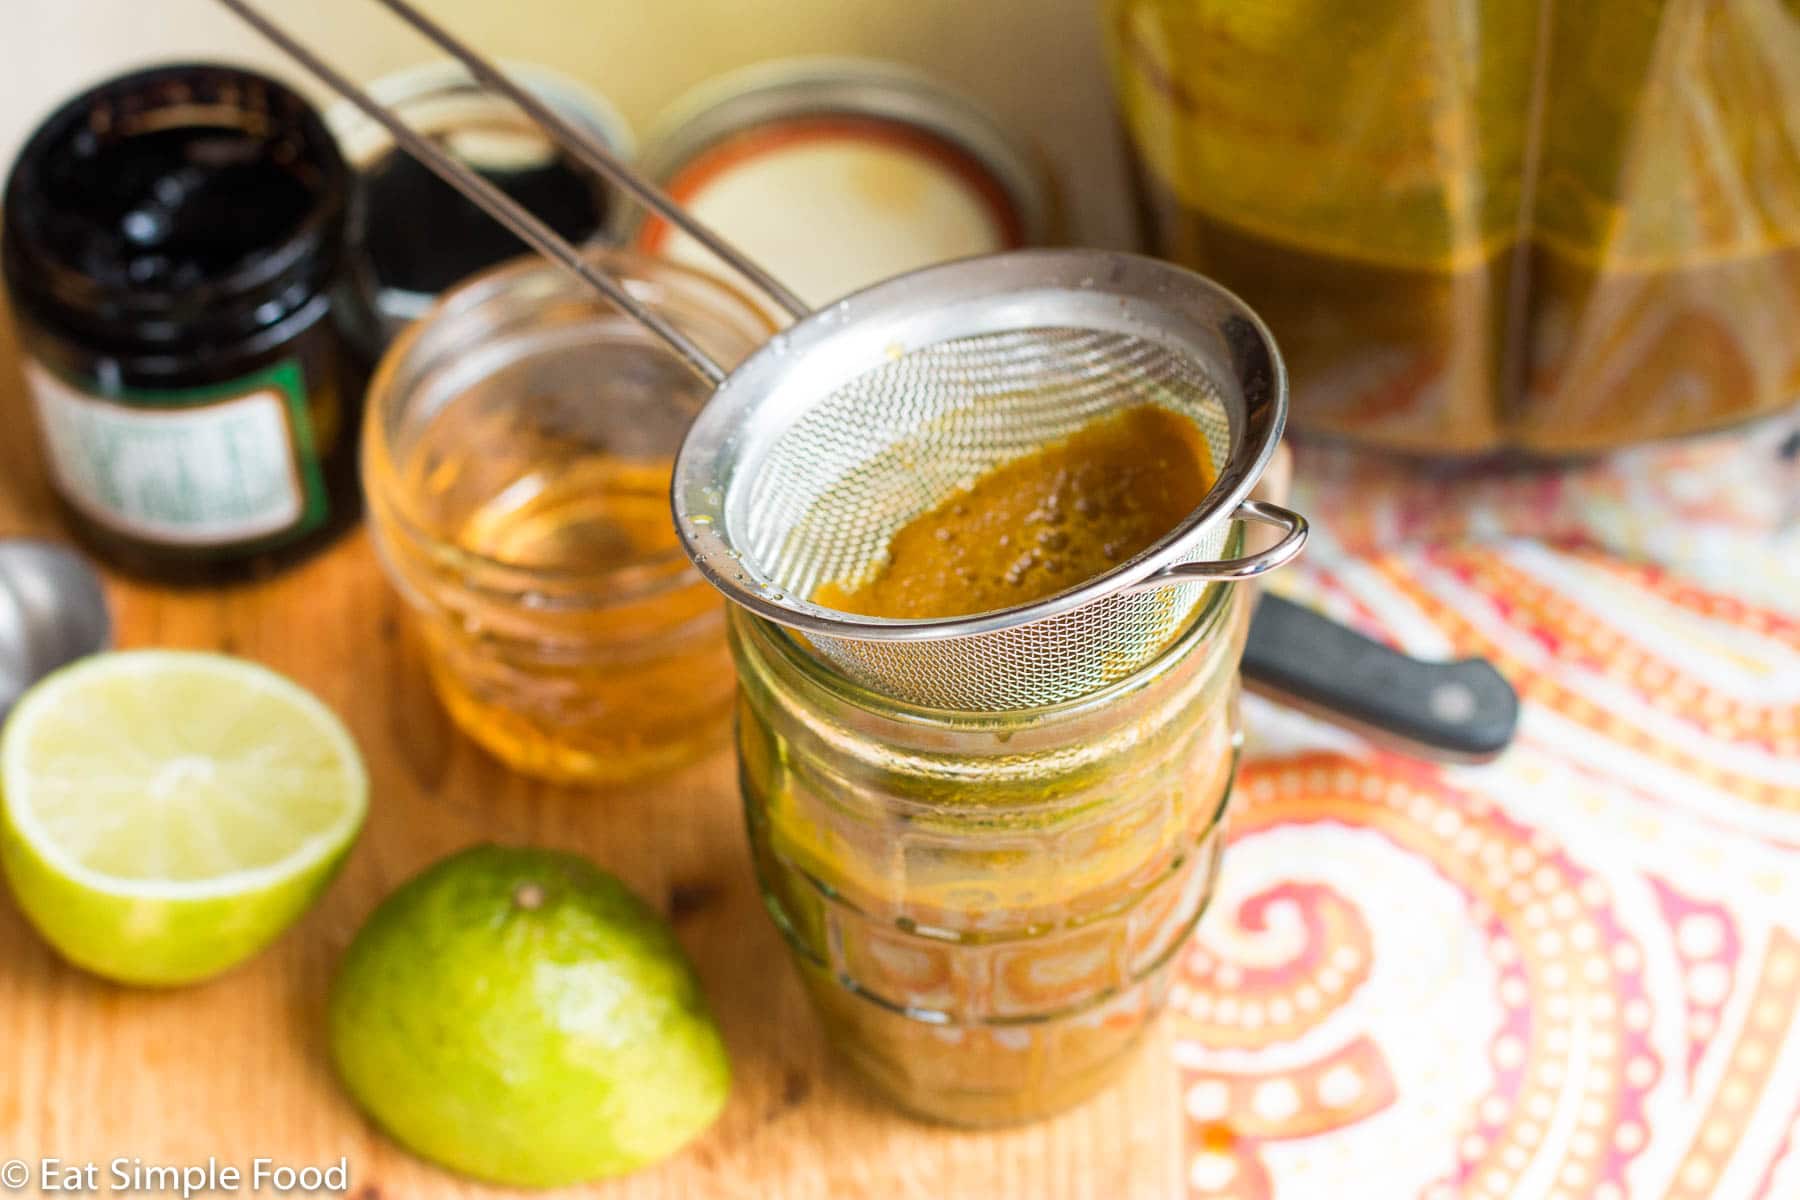 Small glass of brown yellow jamu drink with a small strainer on top for the turmeric and ginger. Lime on side. Small jar of honey on side.